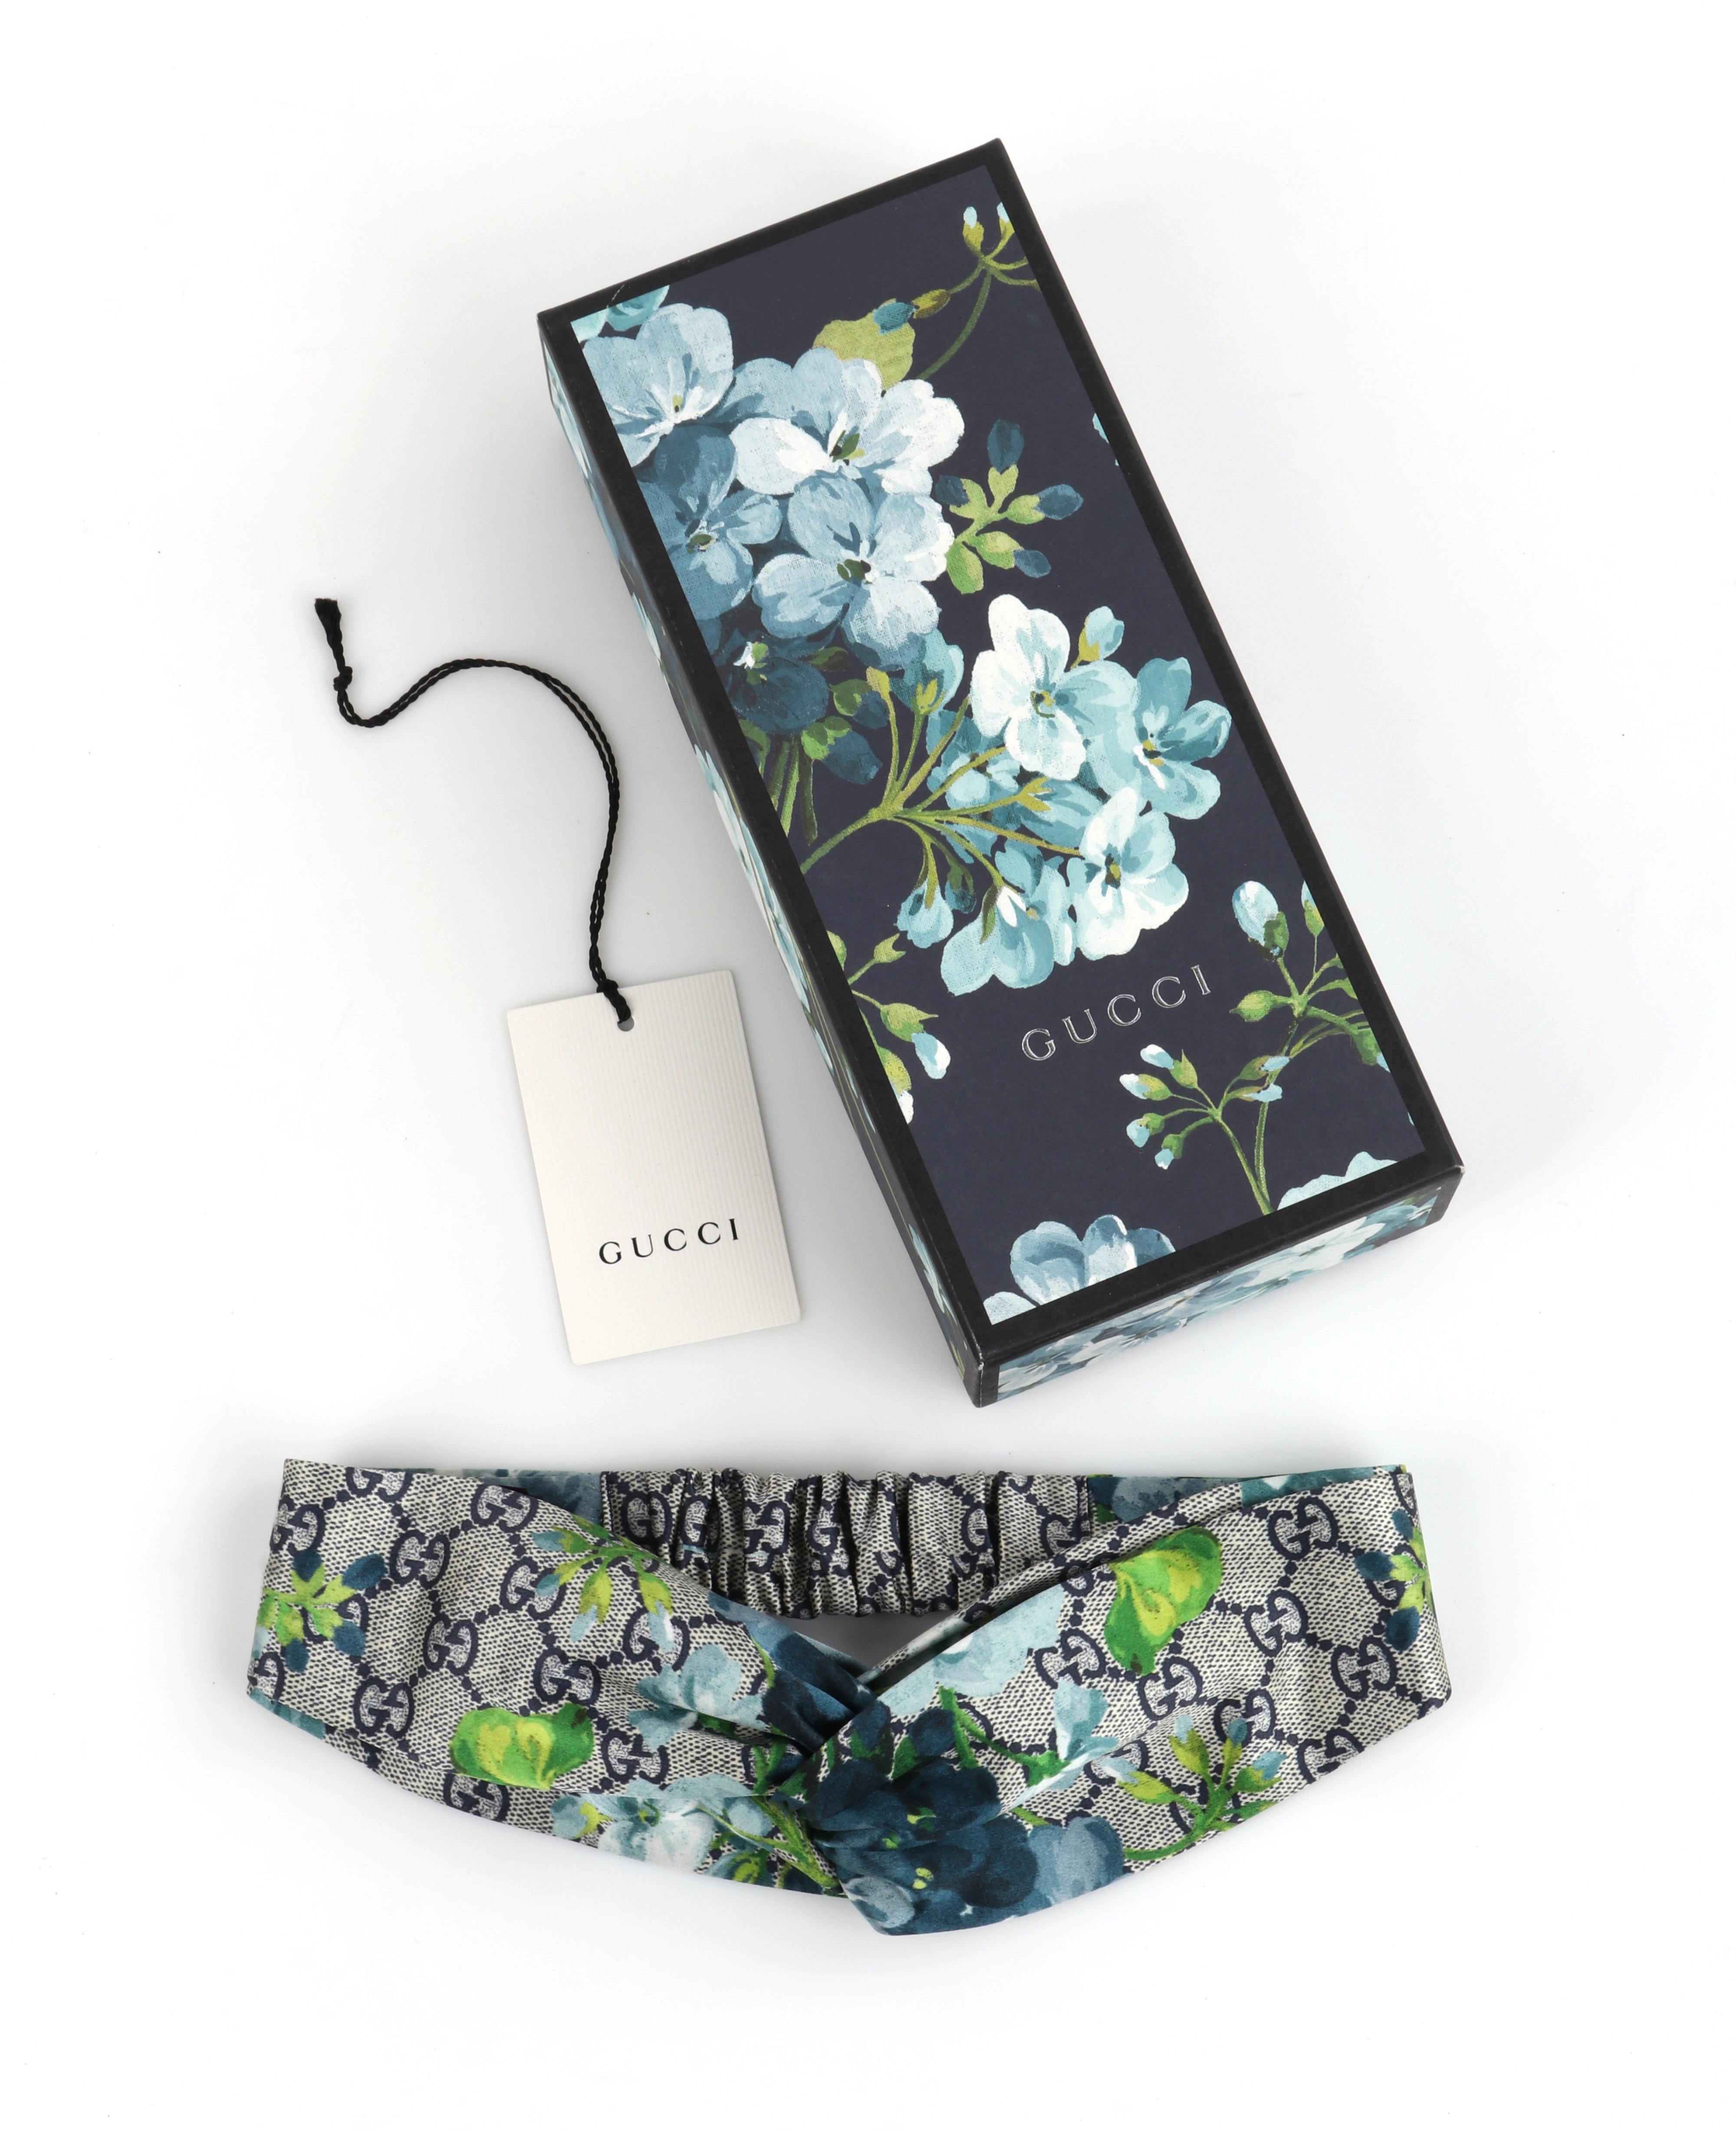 GUCCI c.2016 “Blooms” Blue Gray GG Monogram Floral Knotted Silk Headband NWT
 
Brand/Manufacturer: Gucci
Circa: 2016
Designer: Alessandro Michele
Style: Headband
Color(s): Shades of gray, blue, green, white
Lined: No
Marked Fabric Content: “100%